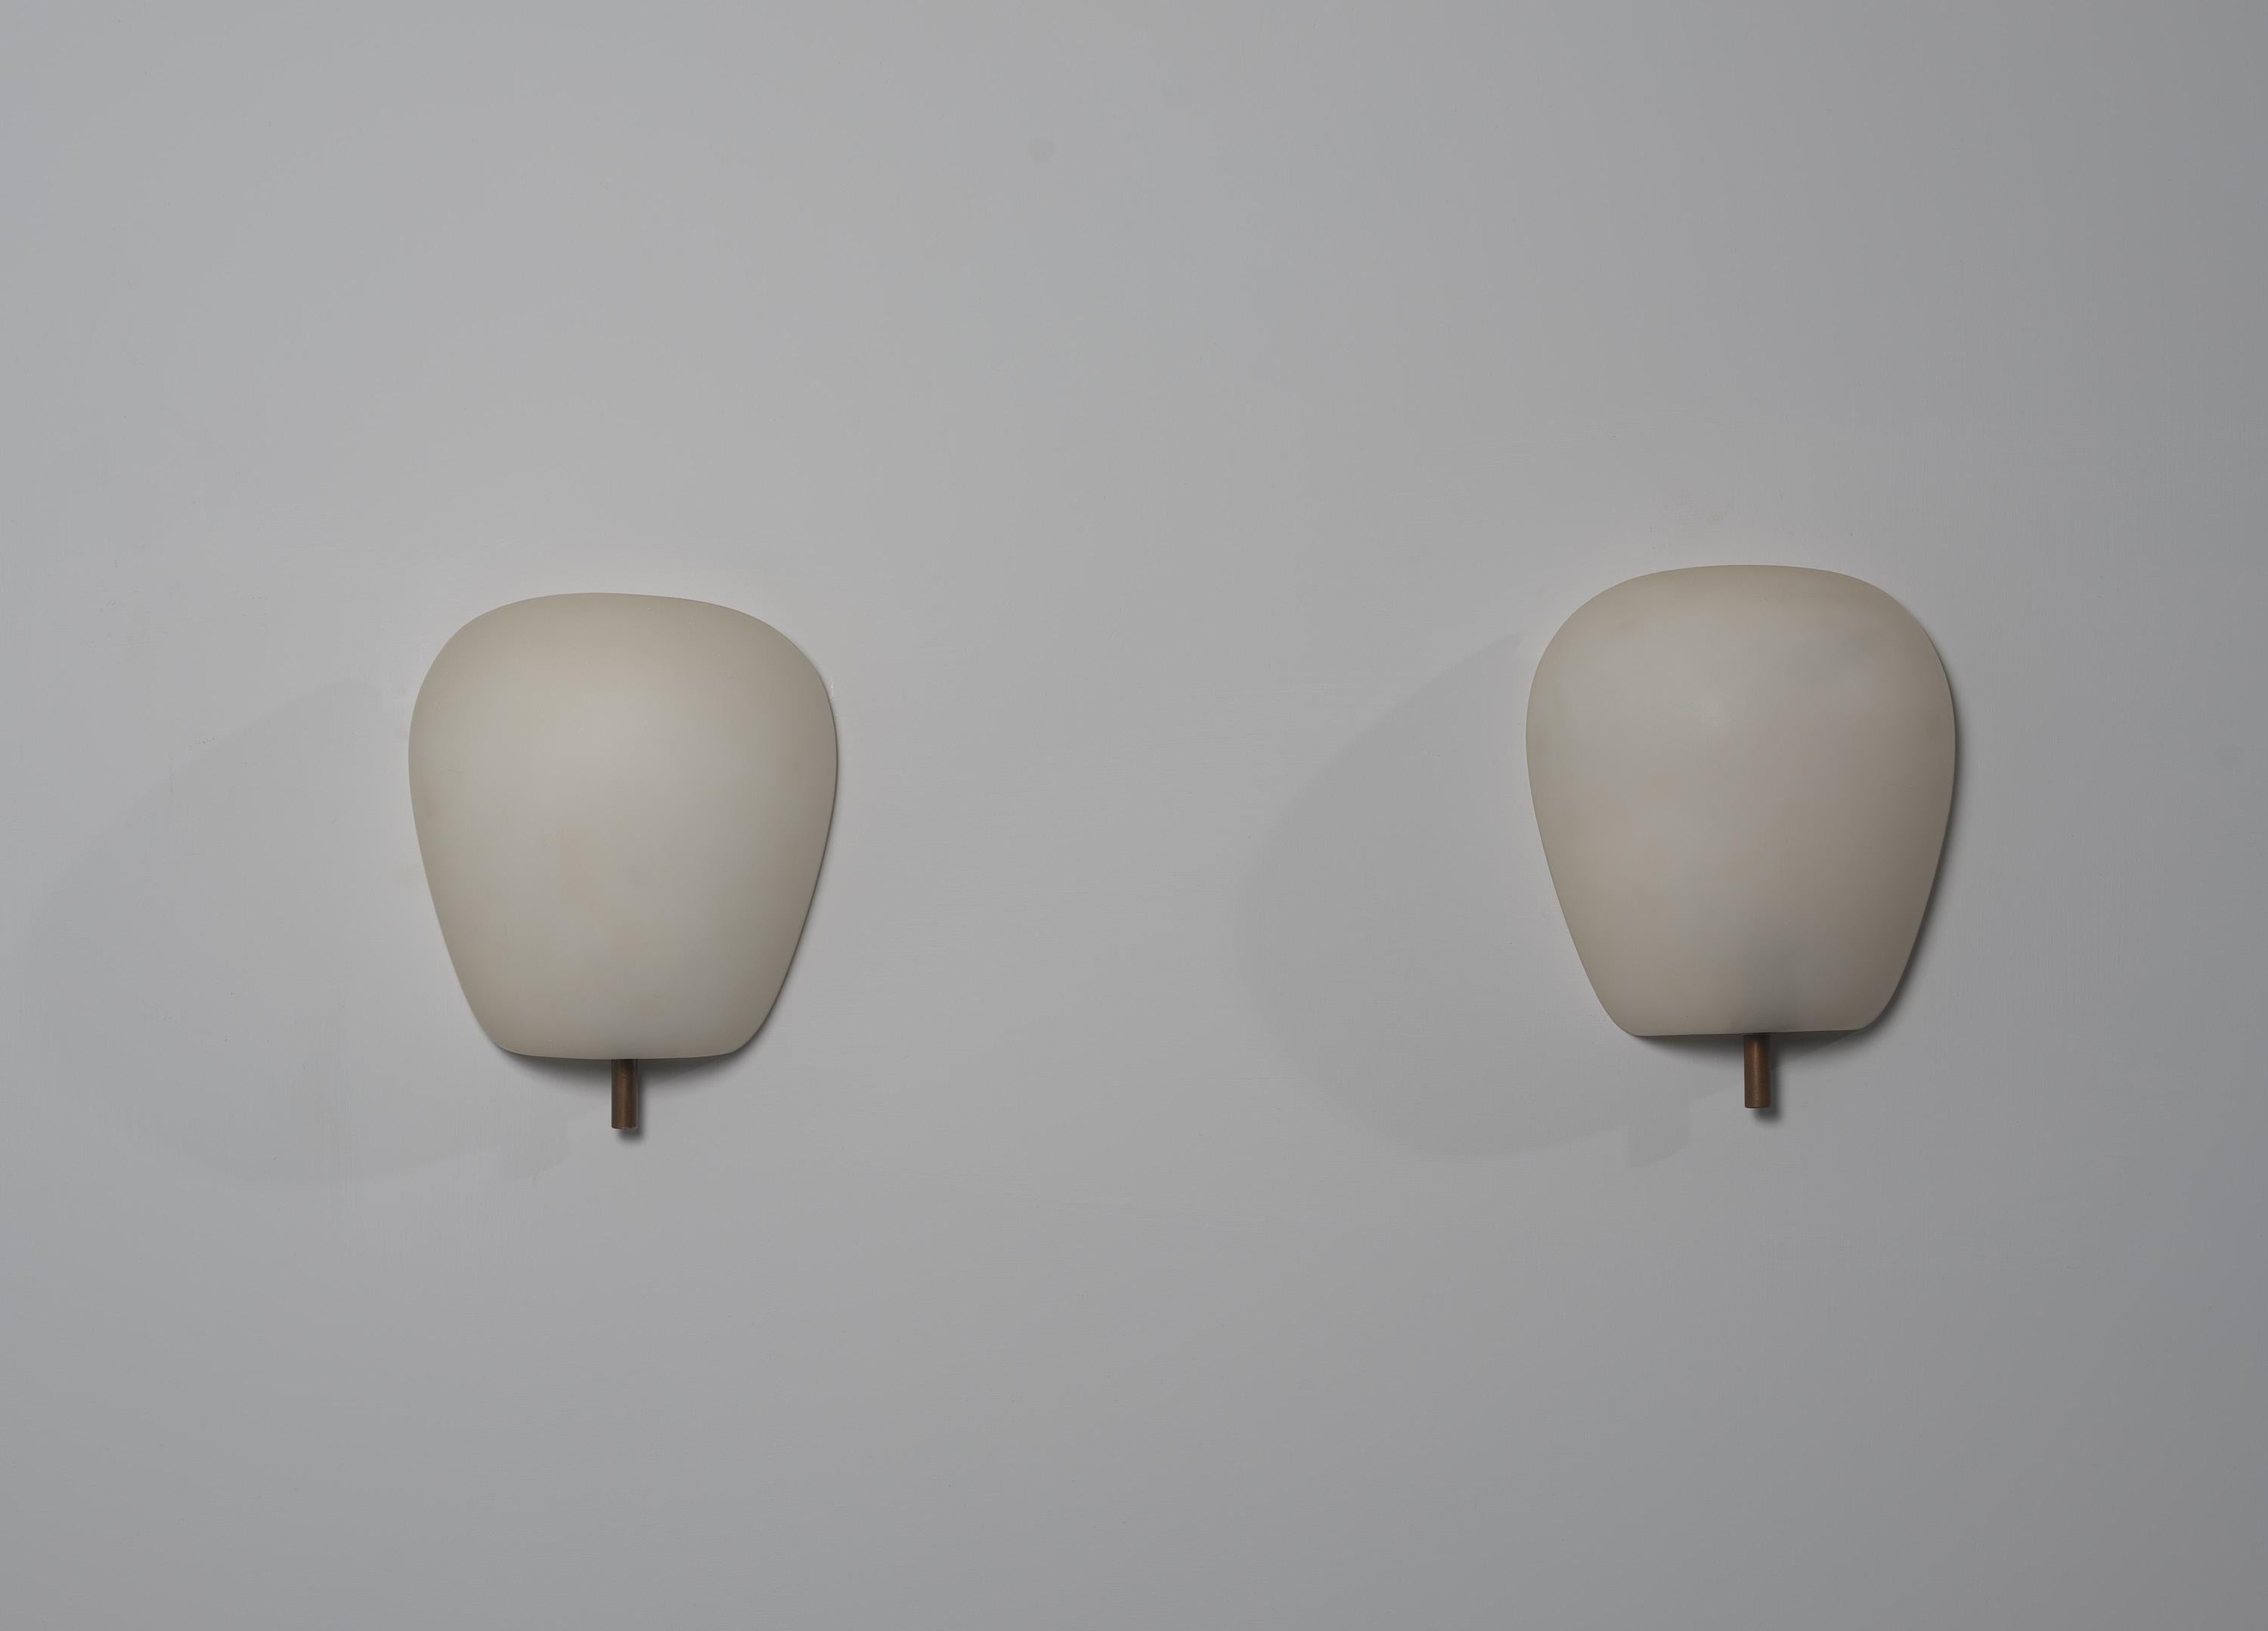 Pair of Italian Design Wall Sconces from the 1950s - Fontana Arte Attribution 2